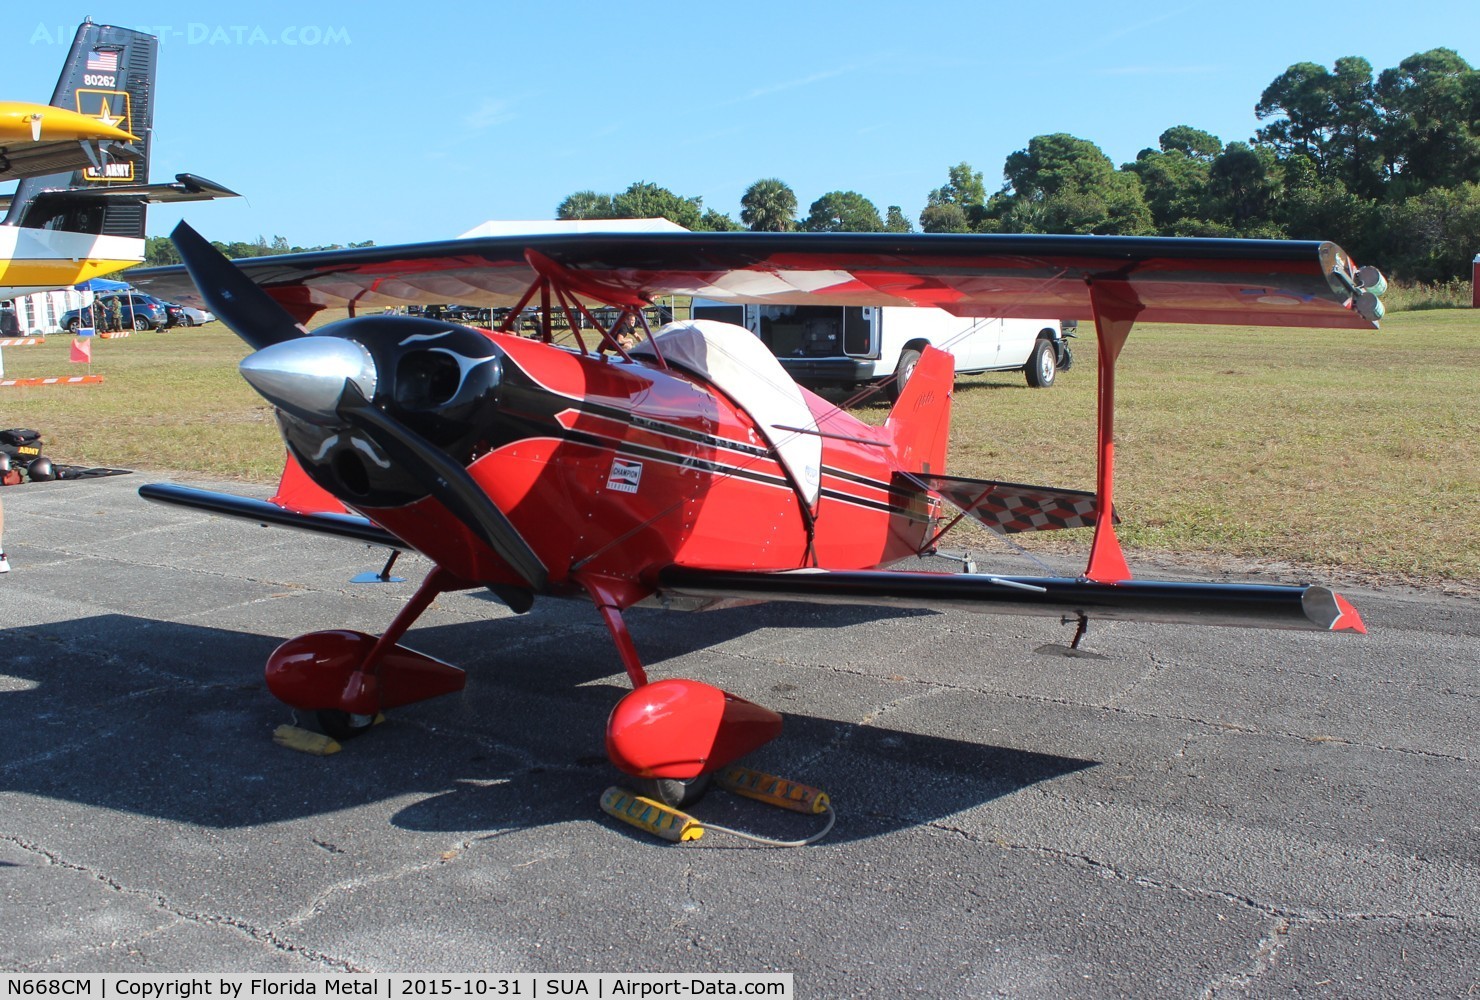 N668CM, 2013 Pitts S-1 Special C/N 068, Pitts S-1